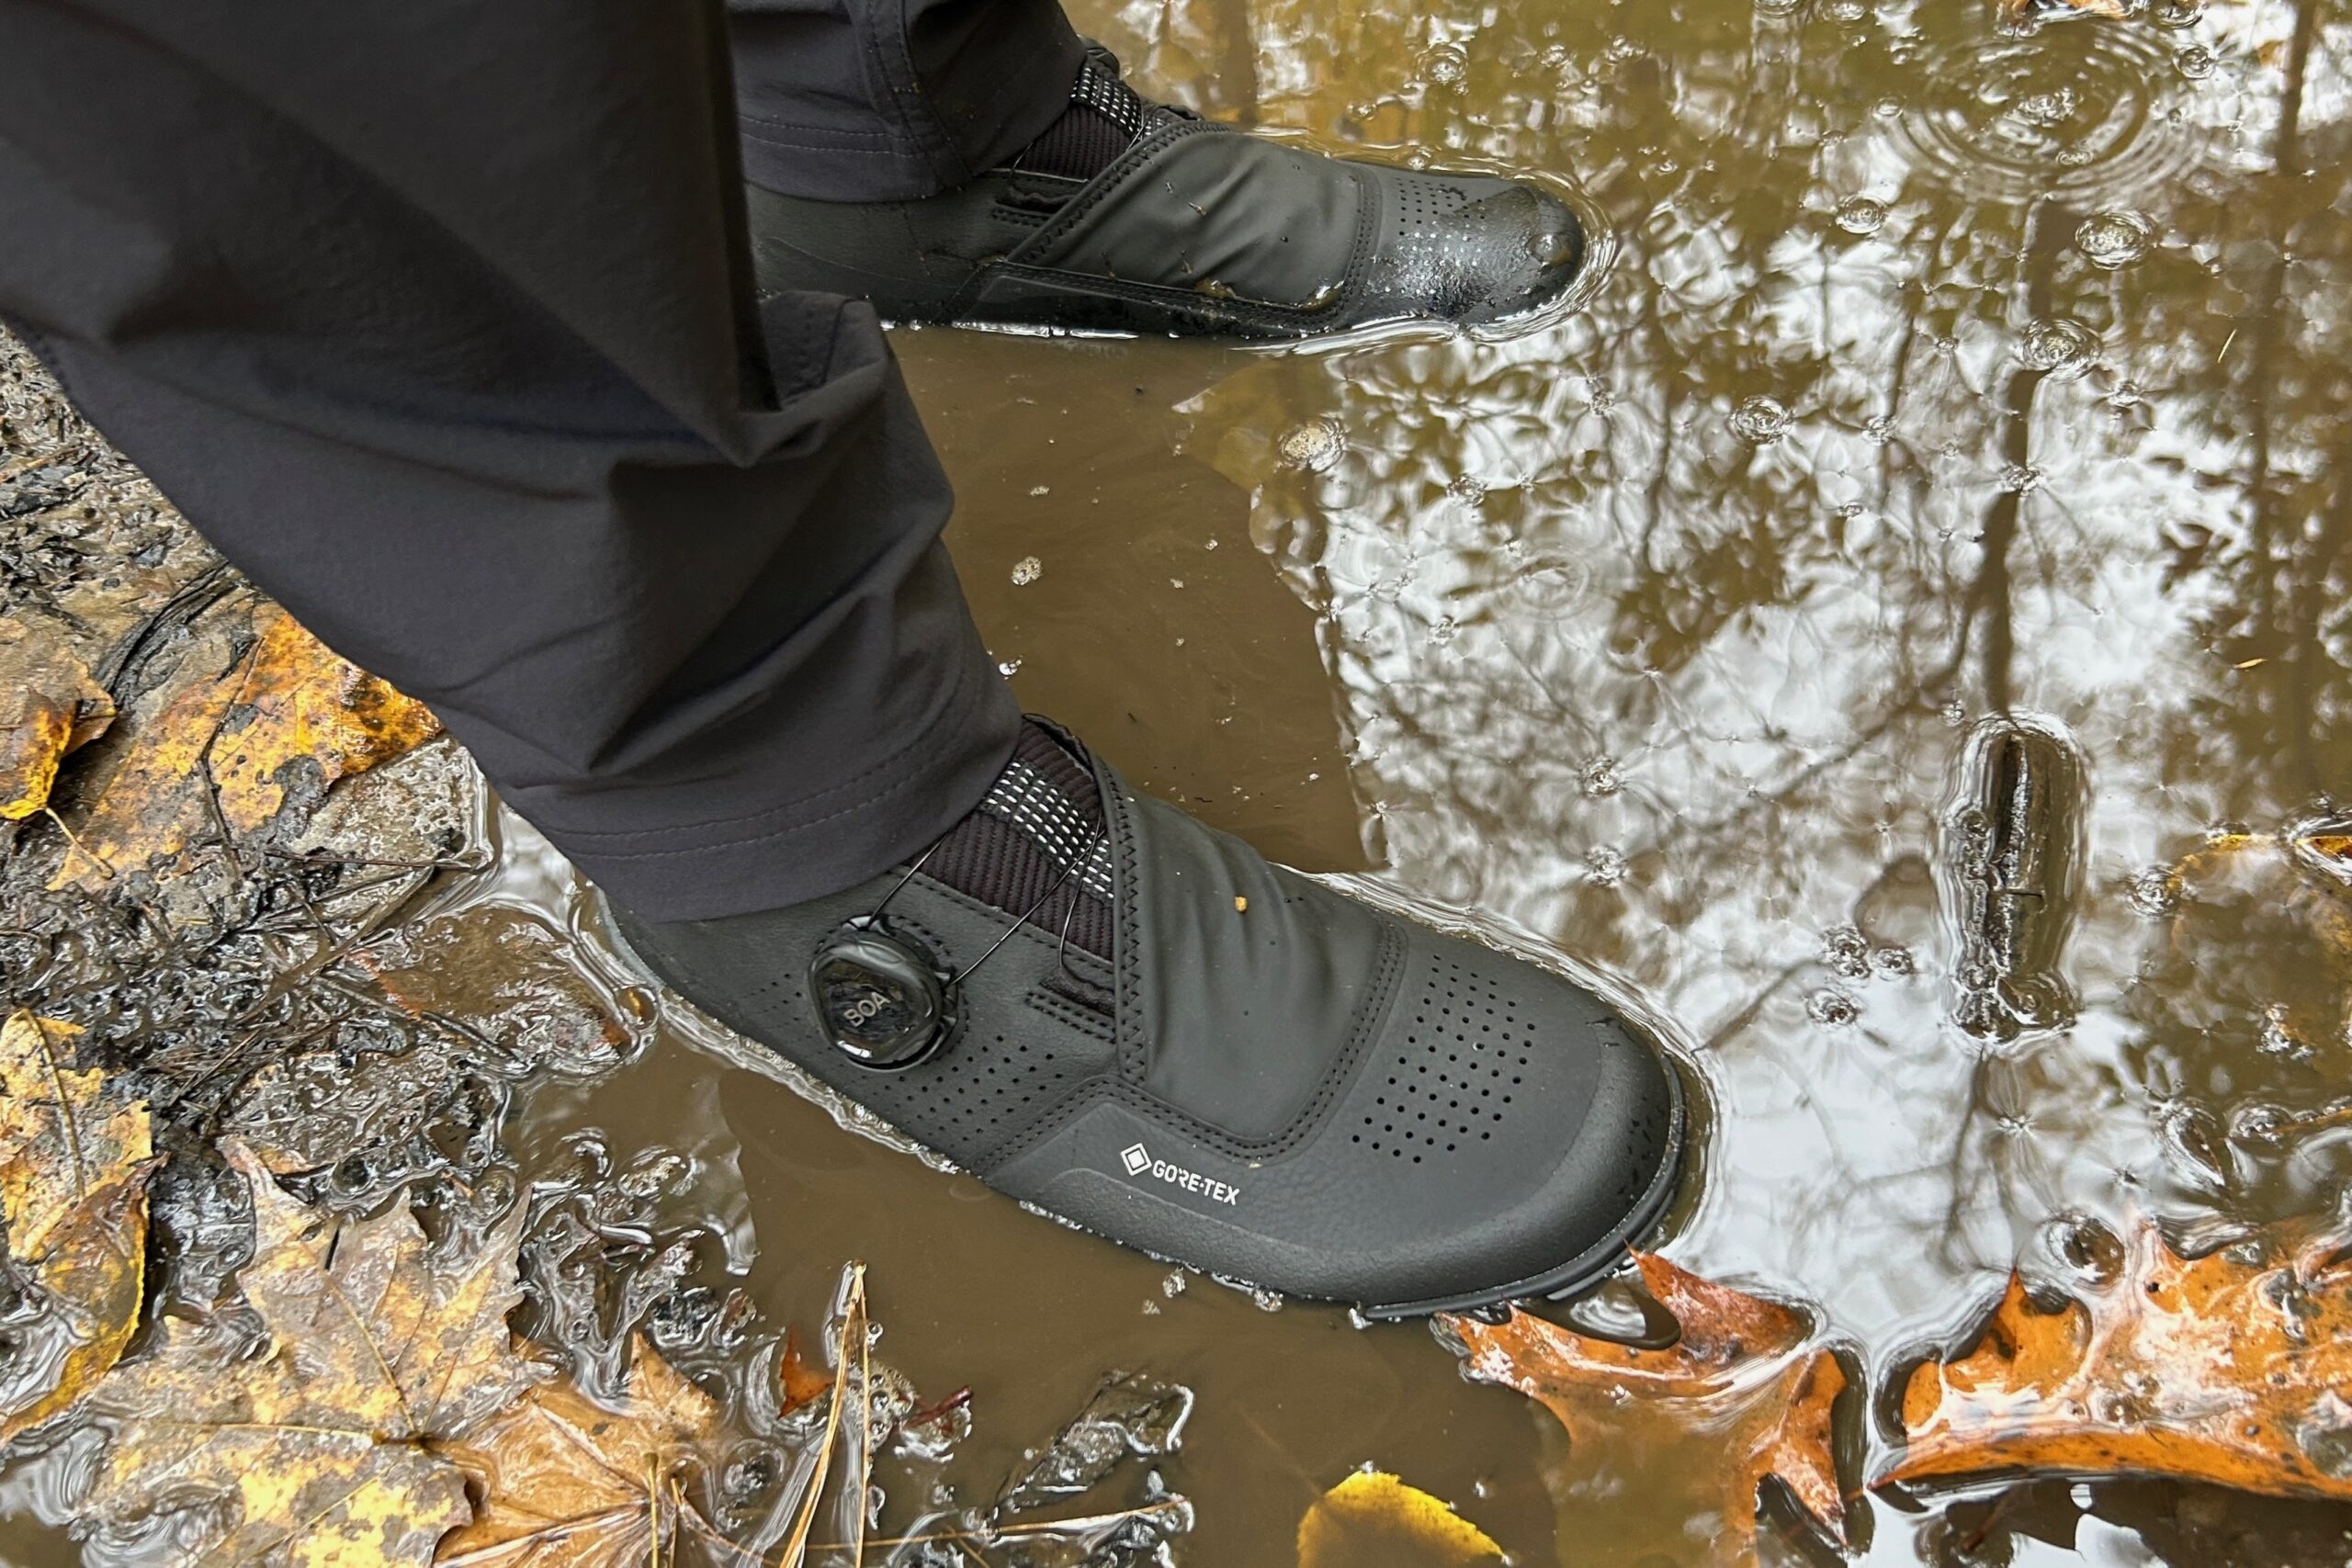 Standing in a puddle in the Shimano GF800 GTX flat pedal shoes